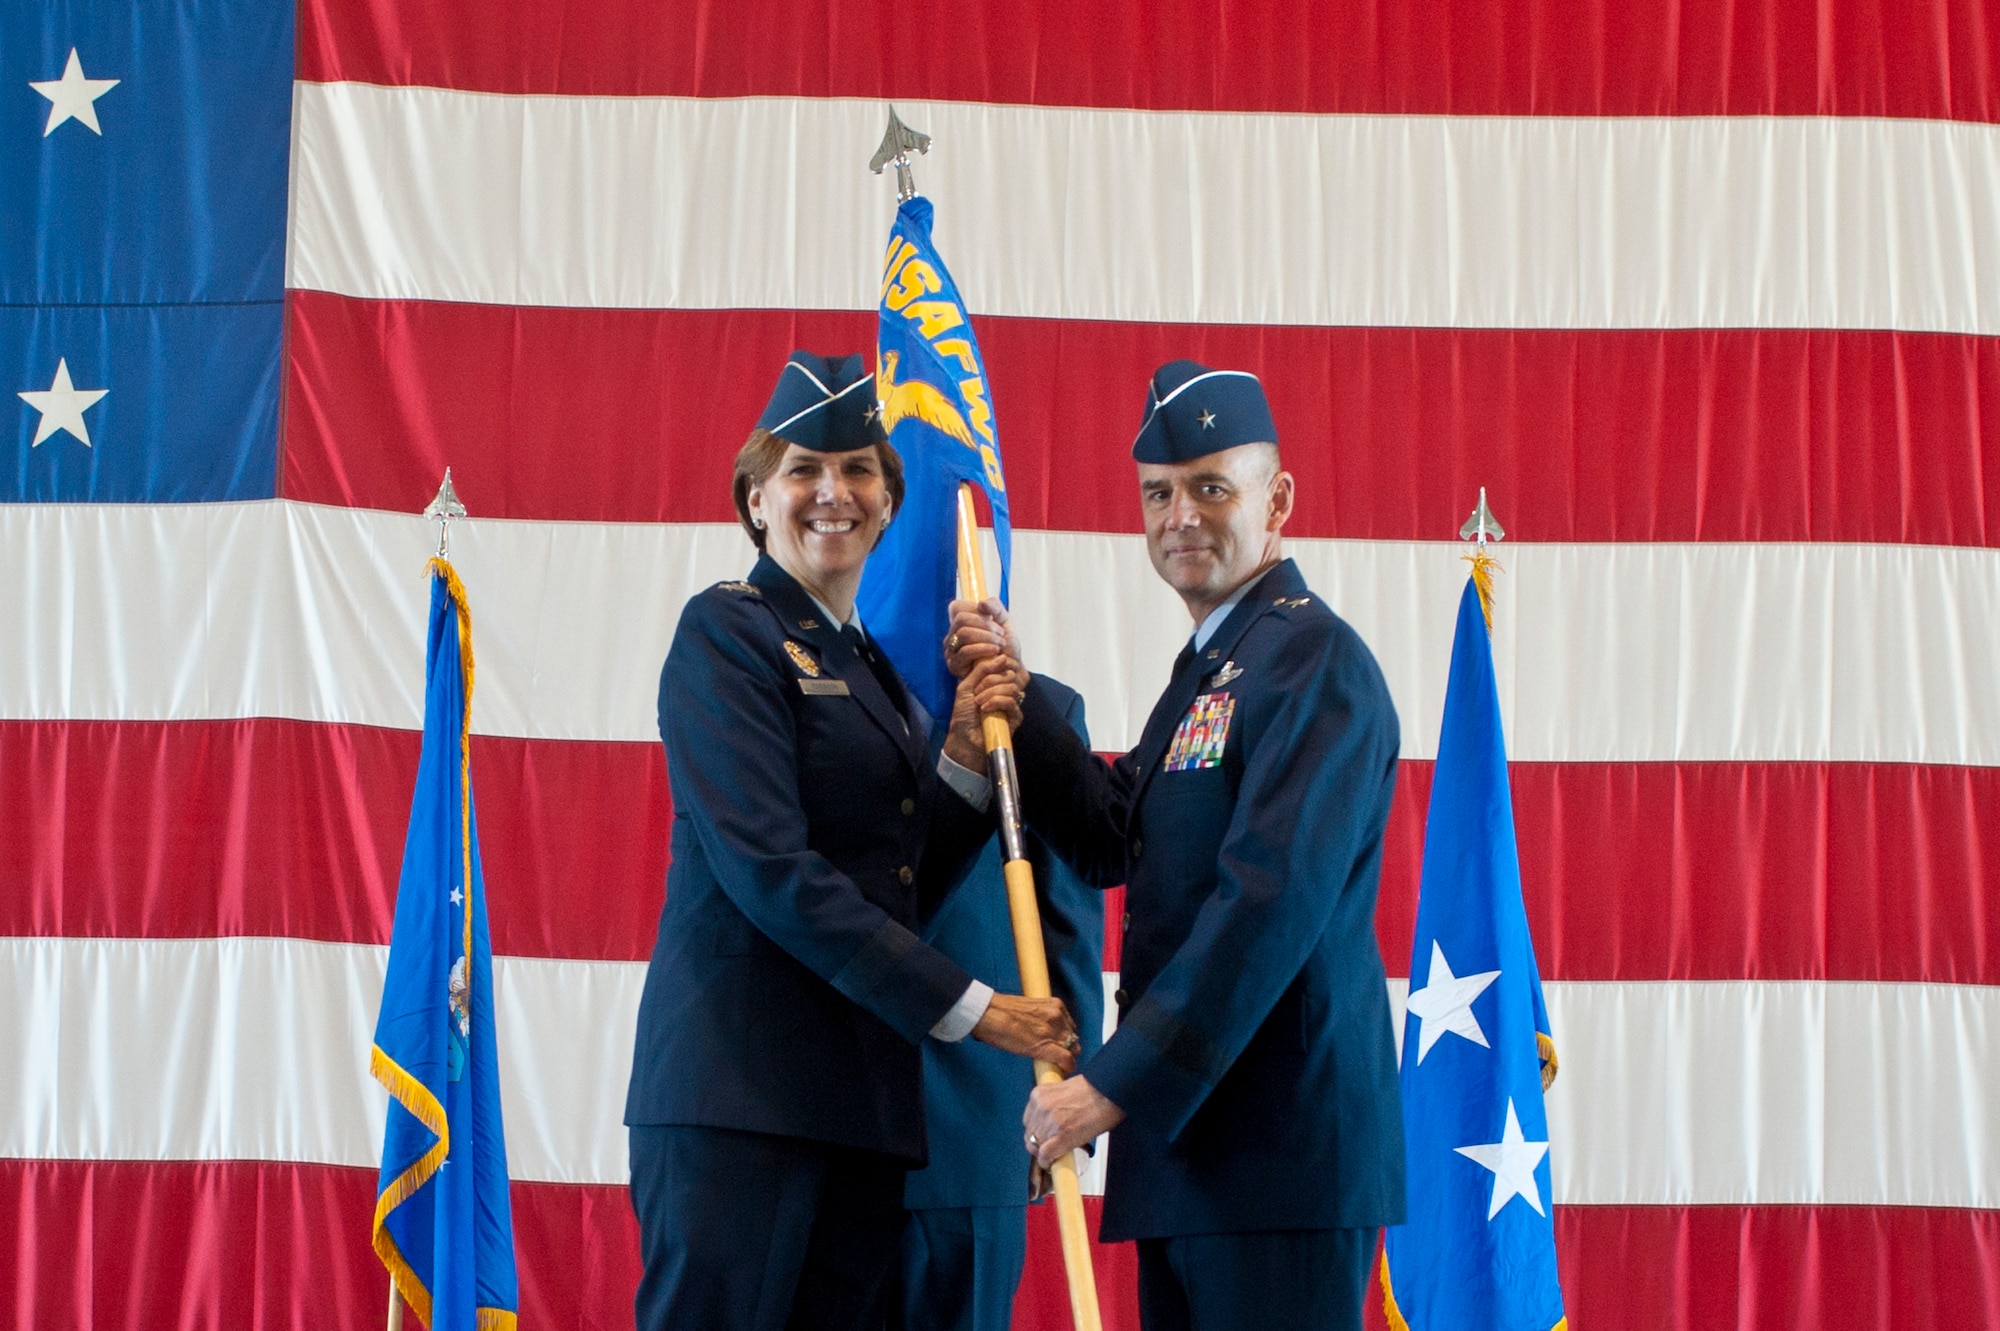 U.S. Air Force Lt. Gen. Lori Robinson, Air Combat Command vice commander, passes the guidon to Brig. Gen. Jay Silveria U.S. Air Force Warfare Center incoming commander Feb. 21, 2014, at Nellis Air Force Base, Nev. The USAFWC maximizes testing, tactics, and training to enhance total force integration of air, space and cyberspace. (U.S. Air Force photo by Senior Airman Matthew Lancaster)